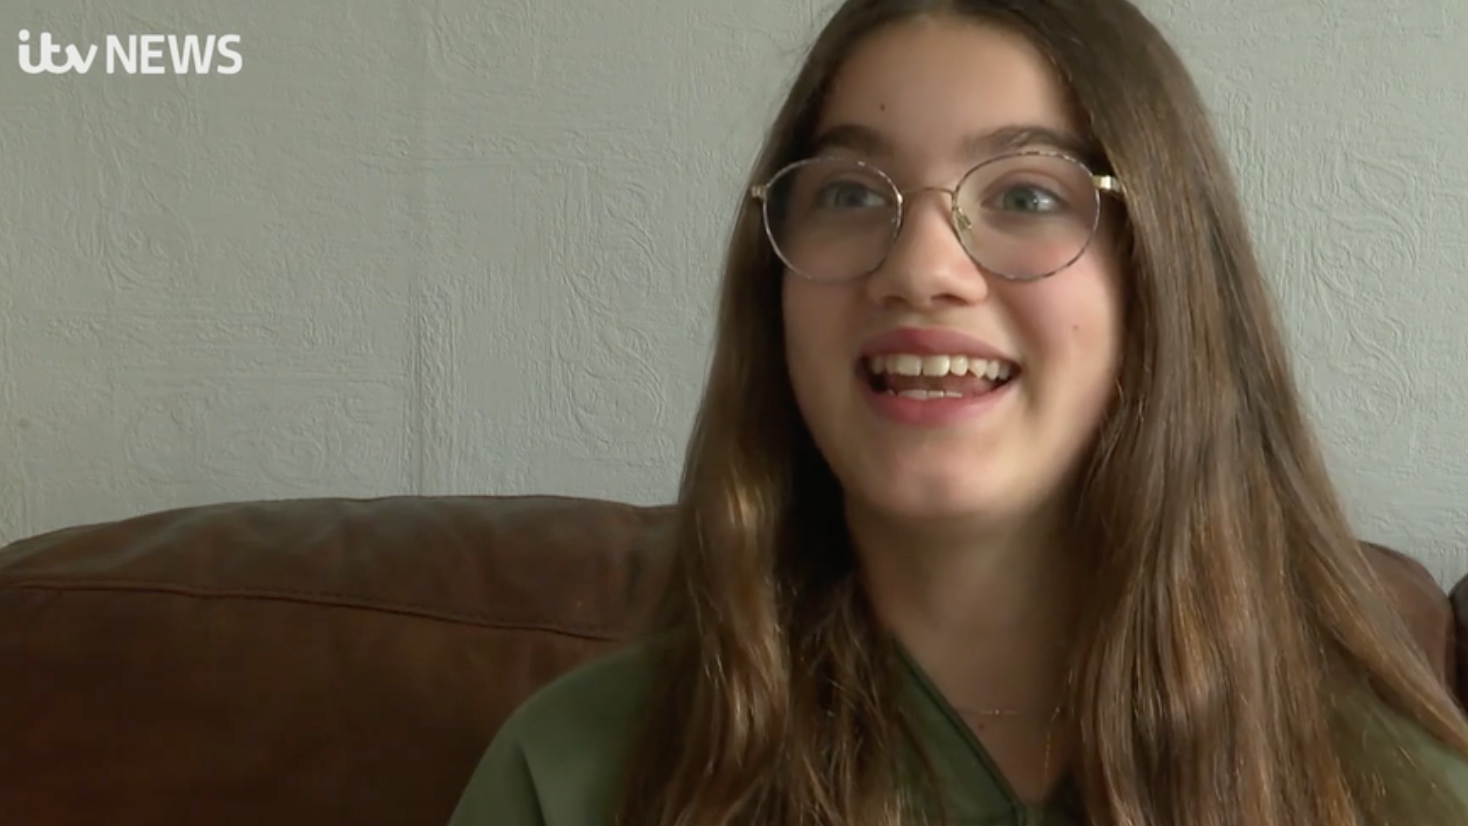 British girl who inspired first Disney princess with glasses